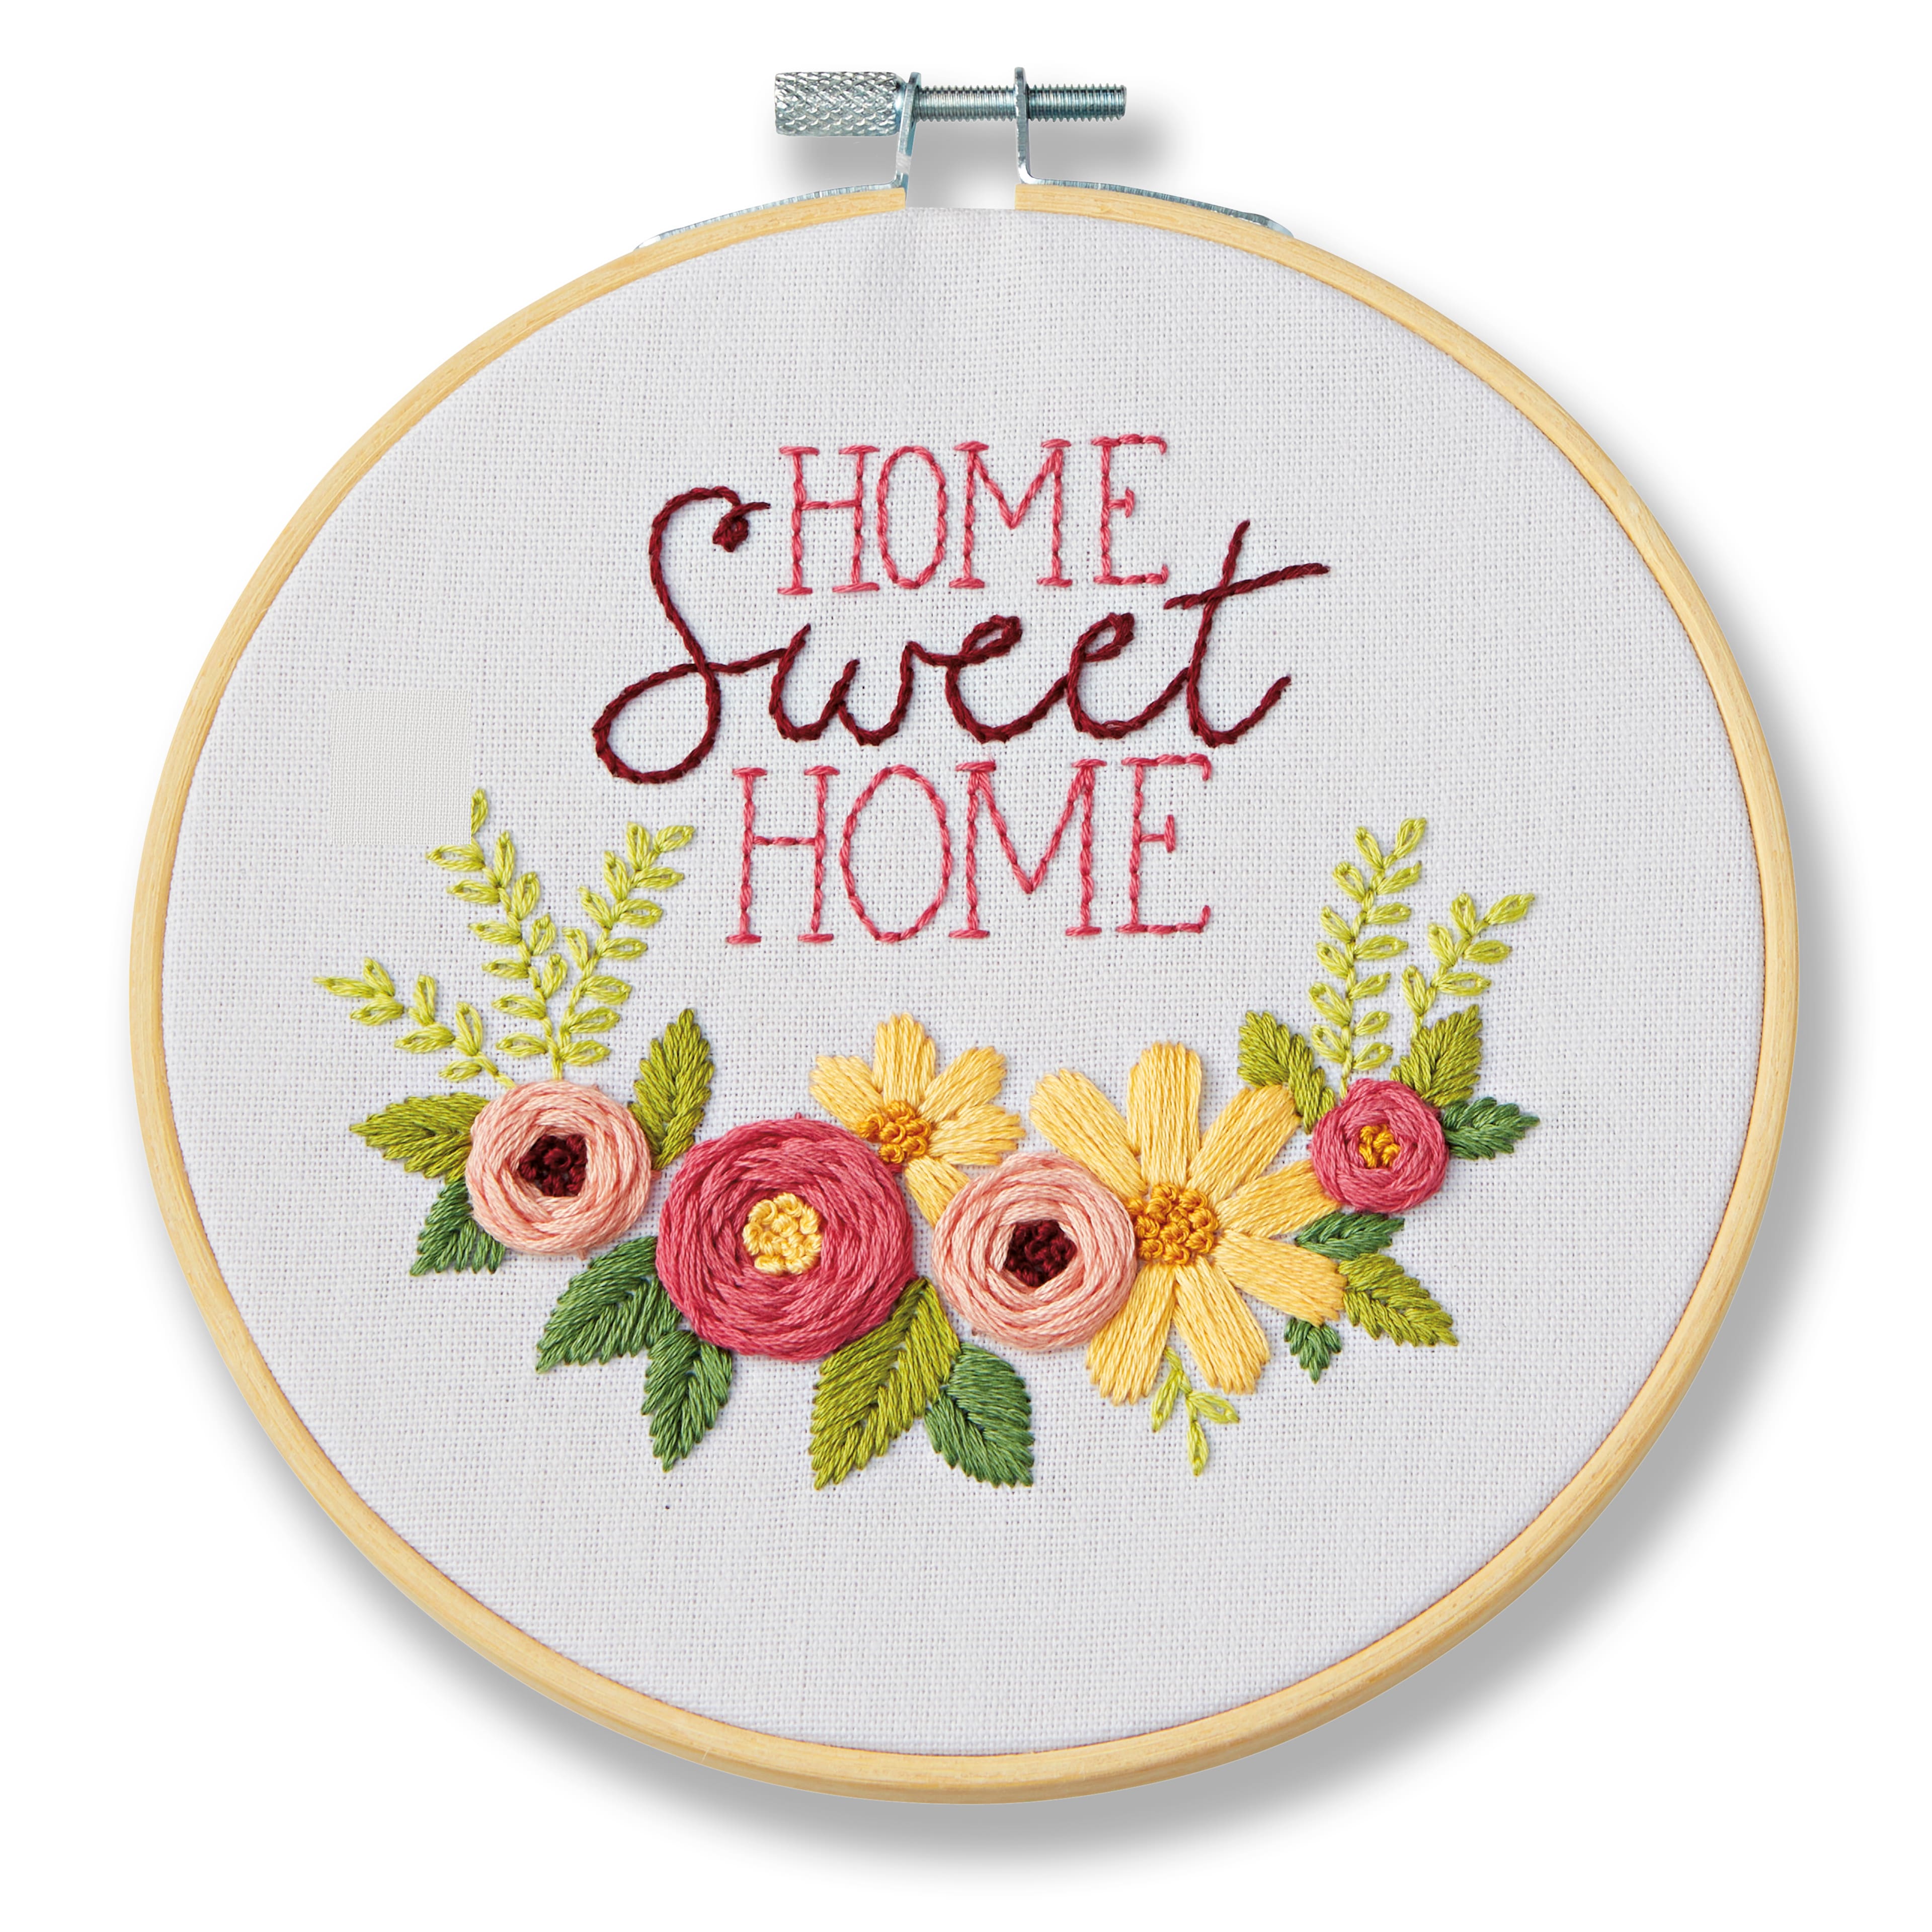 Home Sweet Home Embroidery Kit by iHeartStitchArt – Red Thread Studio